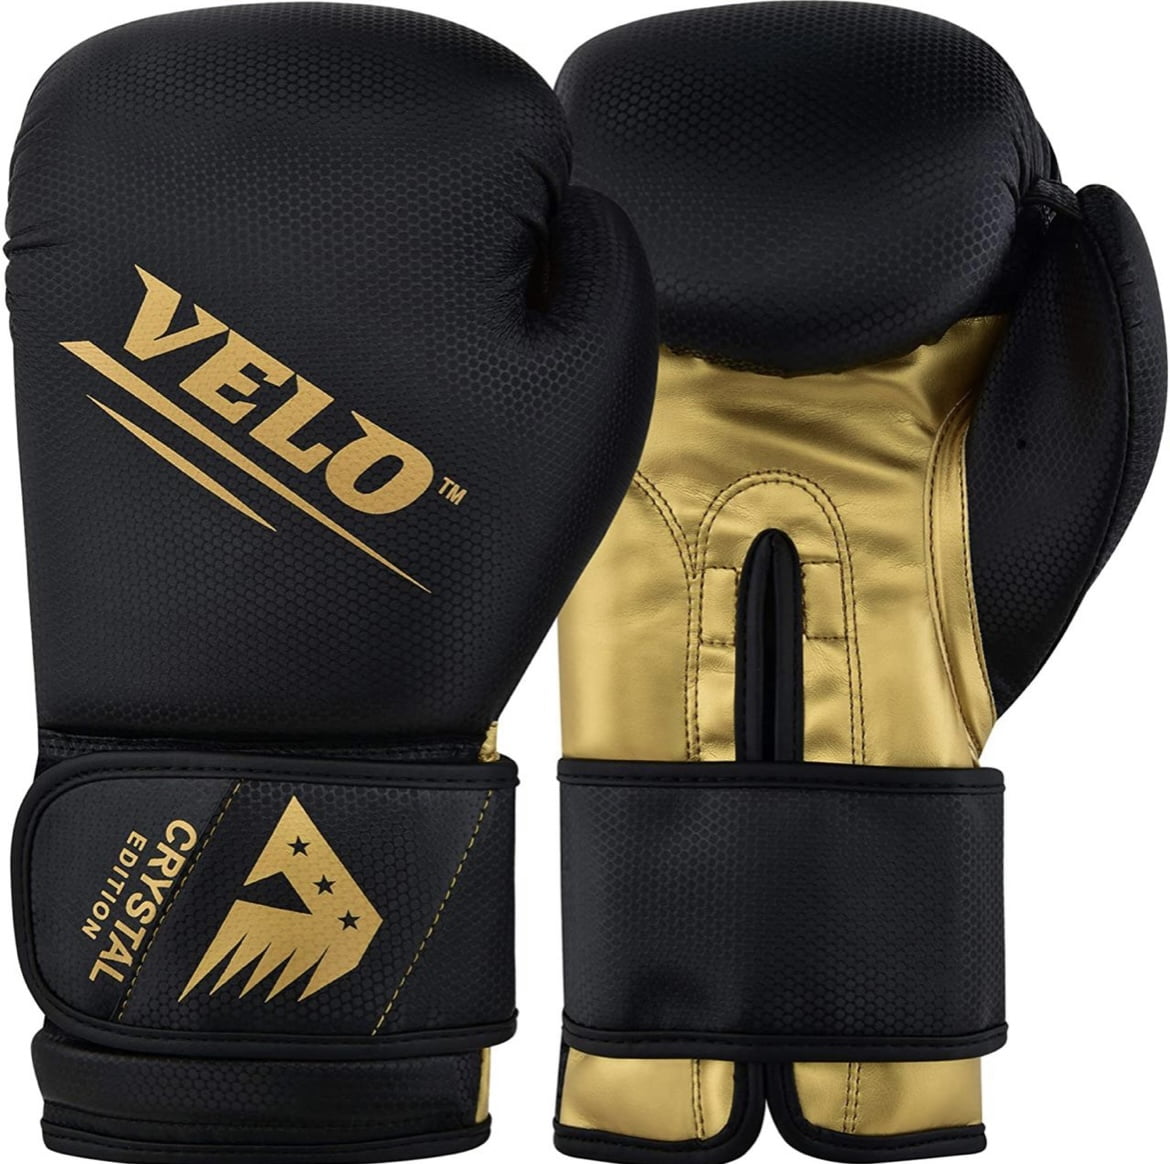 VELO Boxing Gloves Punch Bag Sparring Training Mitts Muay Thai MMA Fitness Mitts 